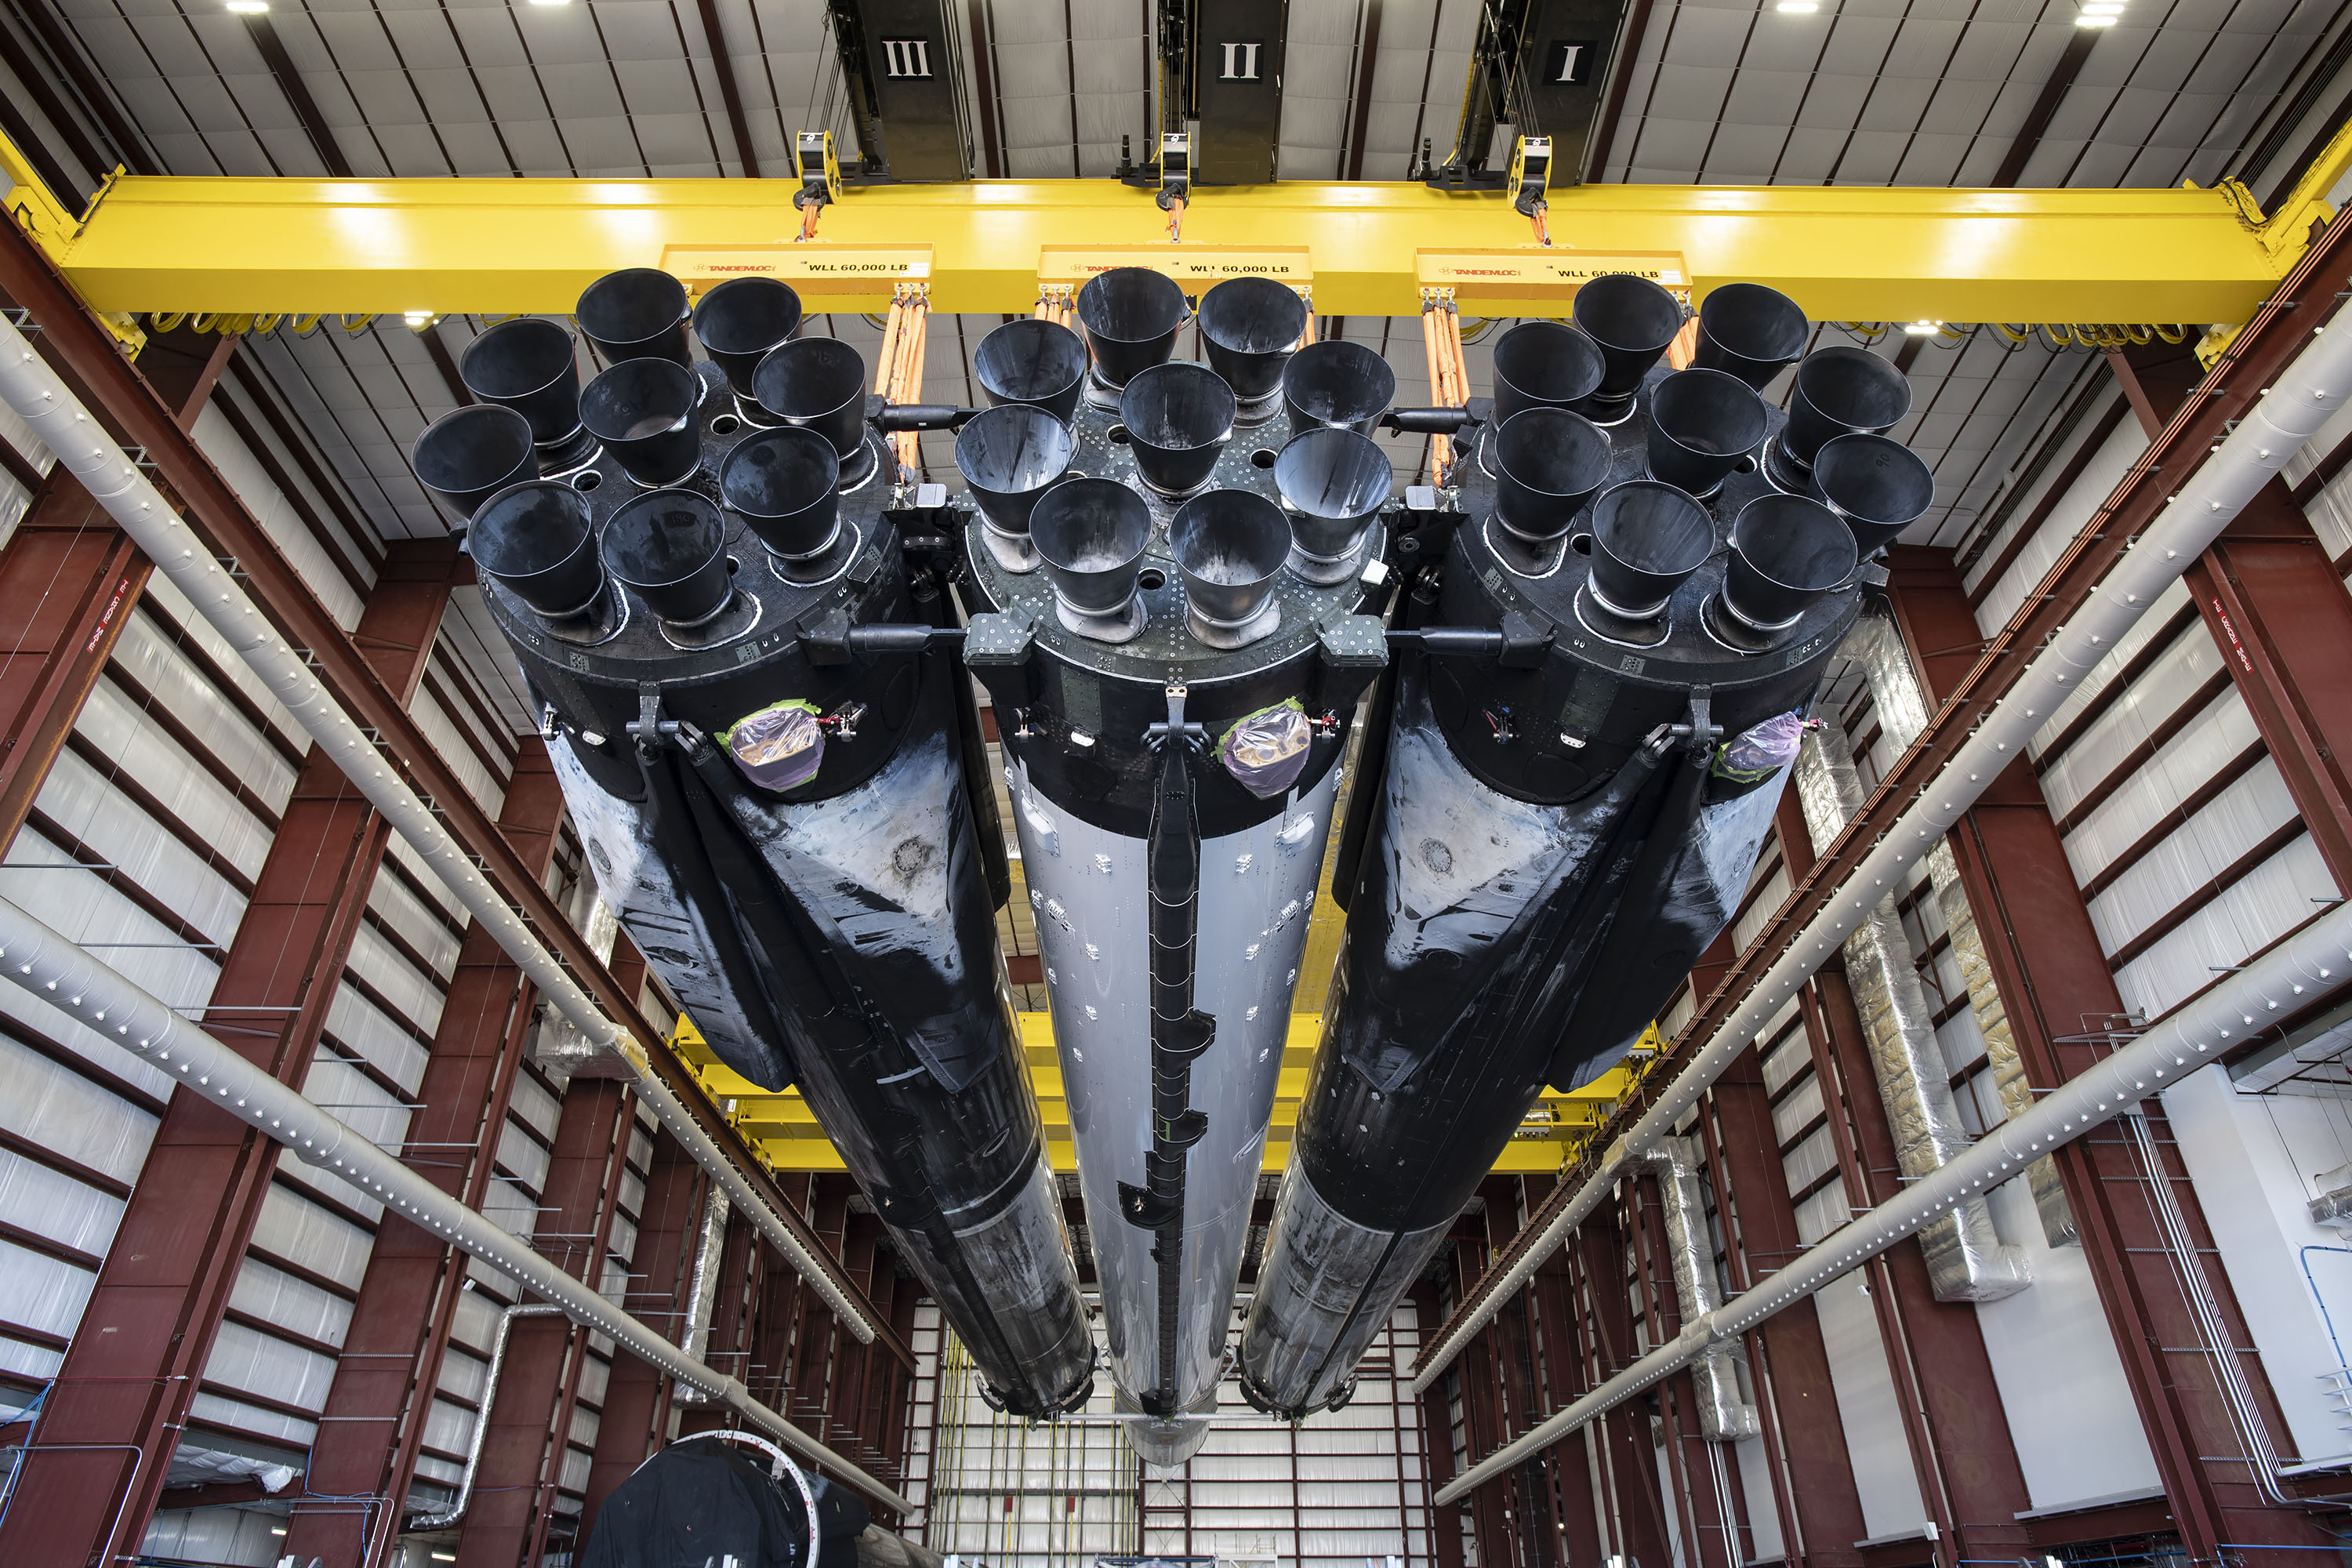 Another view of the fifth Falcon Heavy rocket in a hangar at NASA's Kennedy Space Center ahead of a planned January 2023 launch. SpaceX posted this photo on Jan. 7.